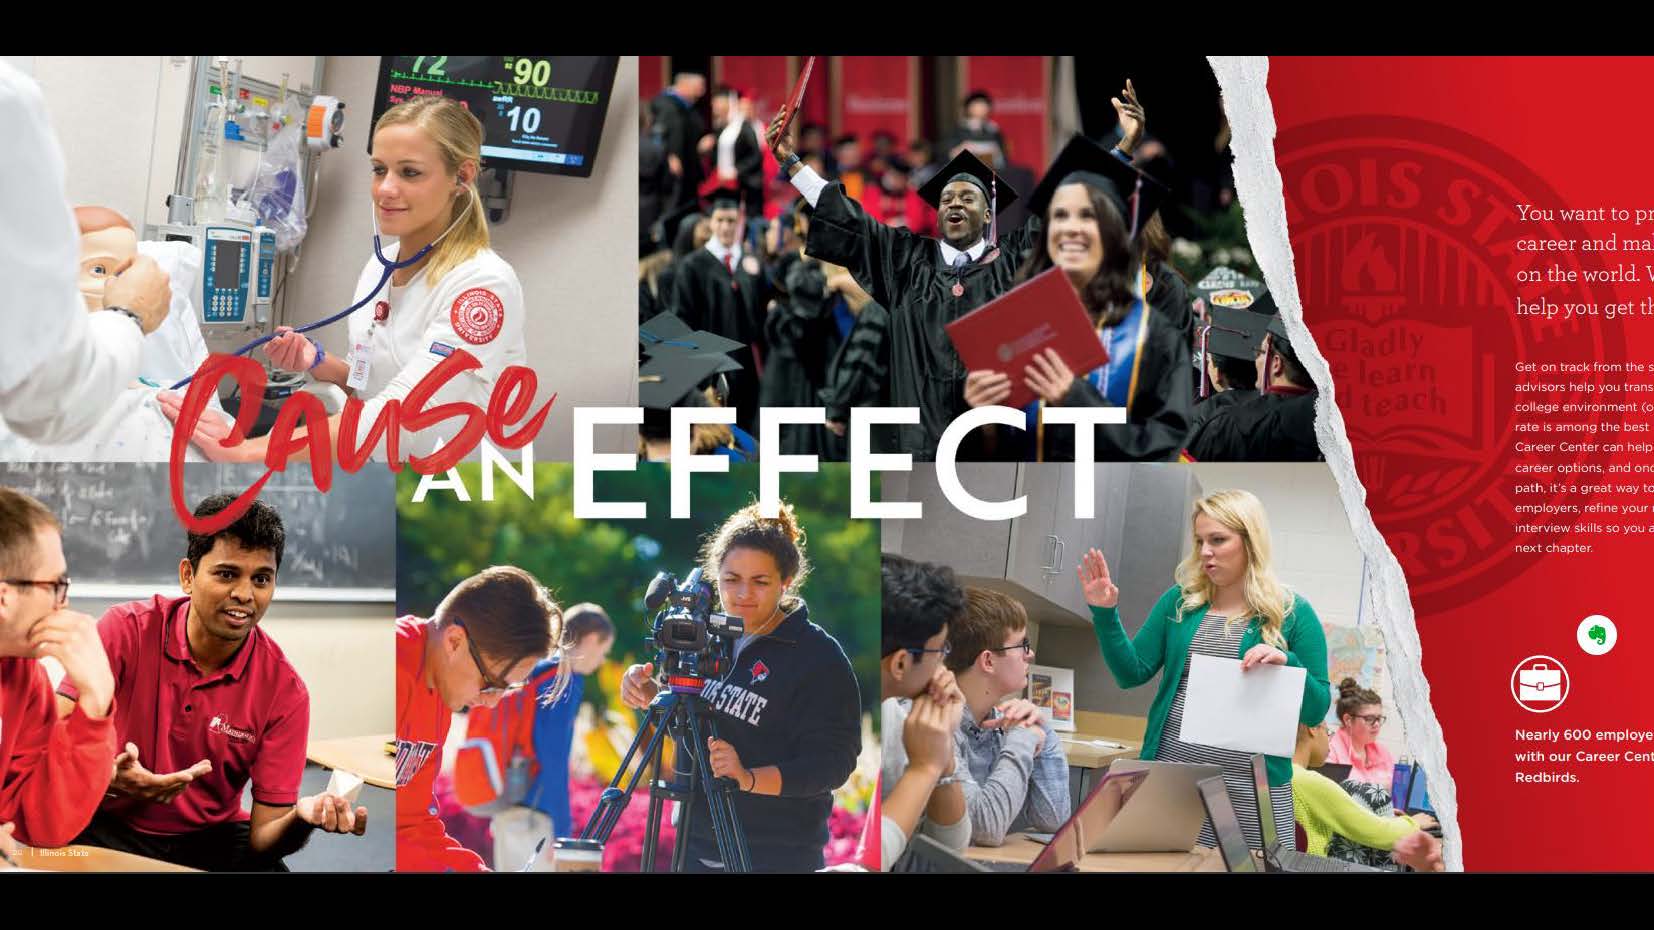 Publications, Student Recruitment-Individual Publication (Gold): Illinois State University Viewbook 2020 designed by Michael Mahle and Evan Walles and with photography by Lyndsie Schlink for the Office of Admissions. Cause and effect